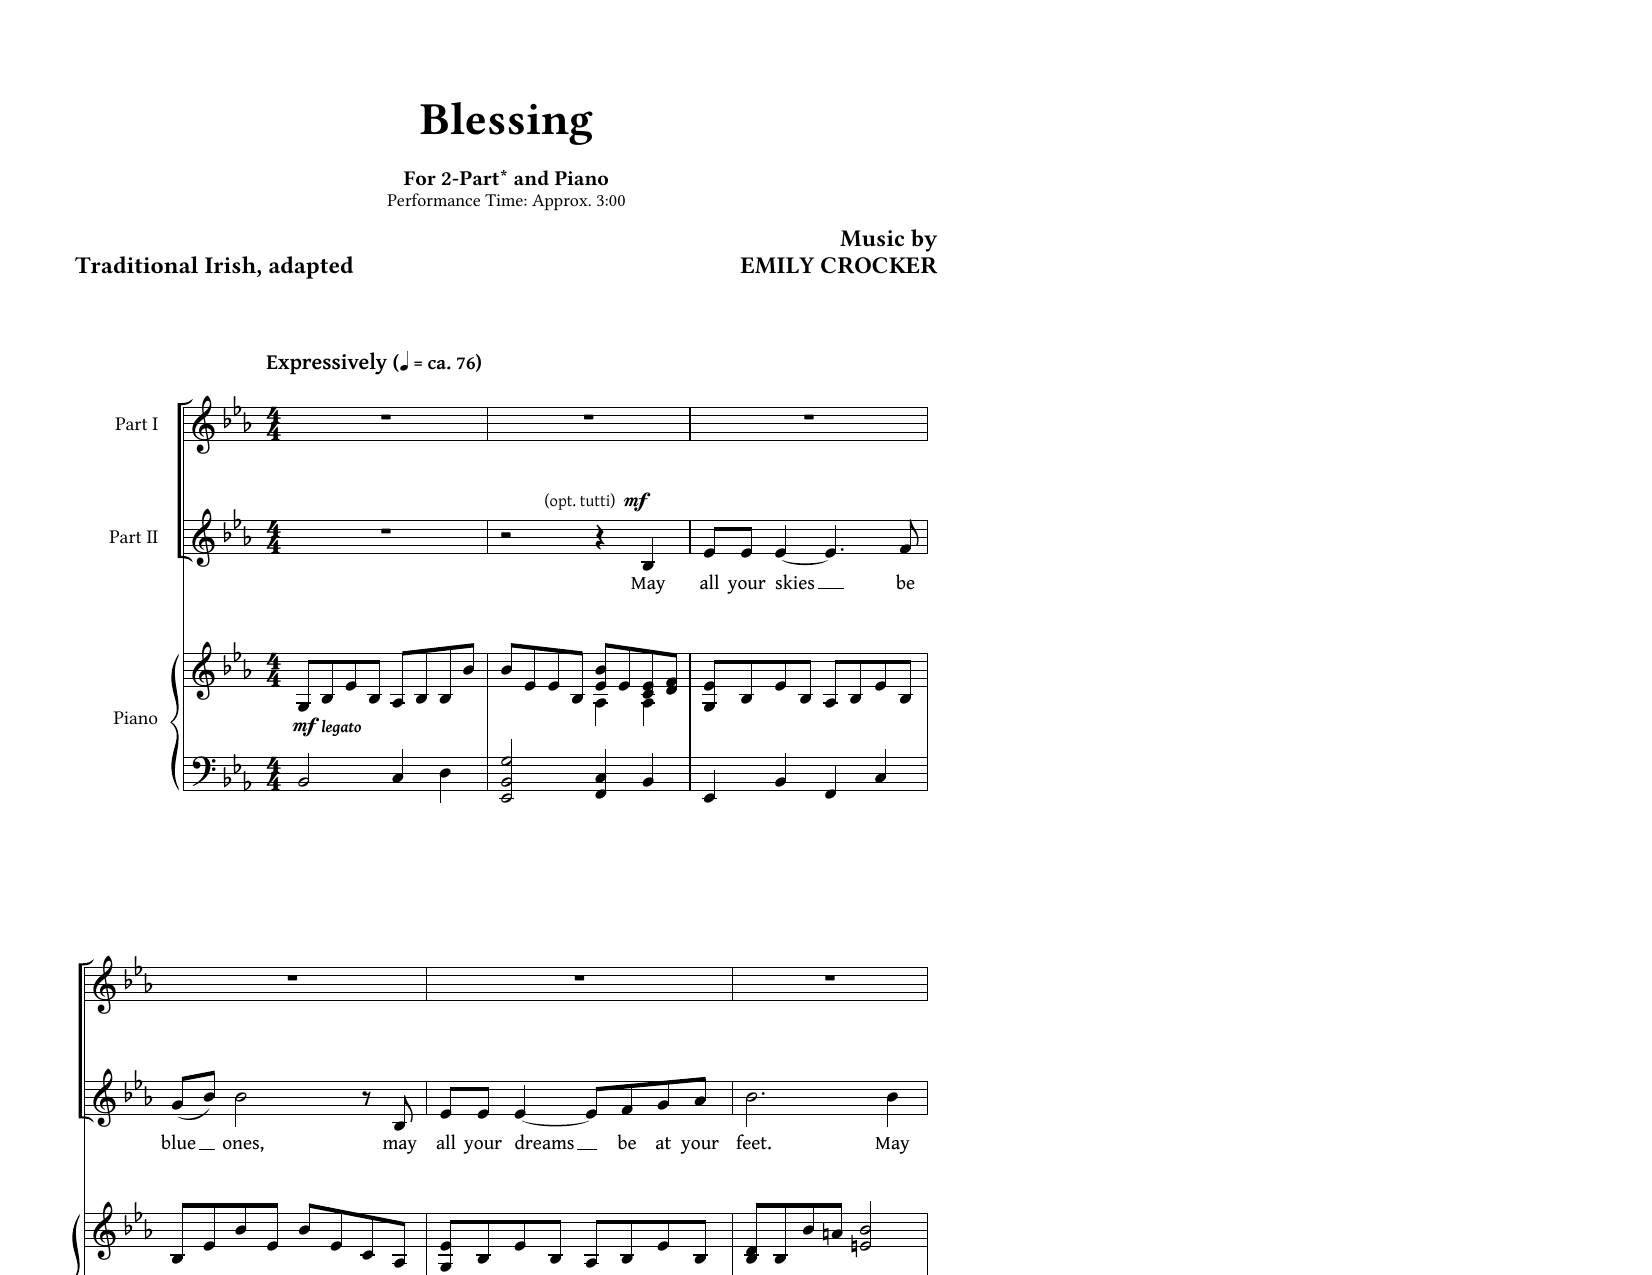 Emily Crocker Blessing sheet music notes and chords. Download Printable PDF.